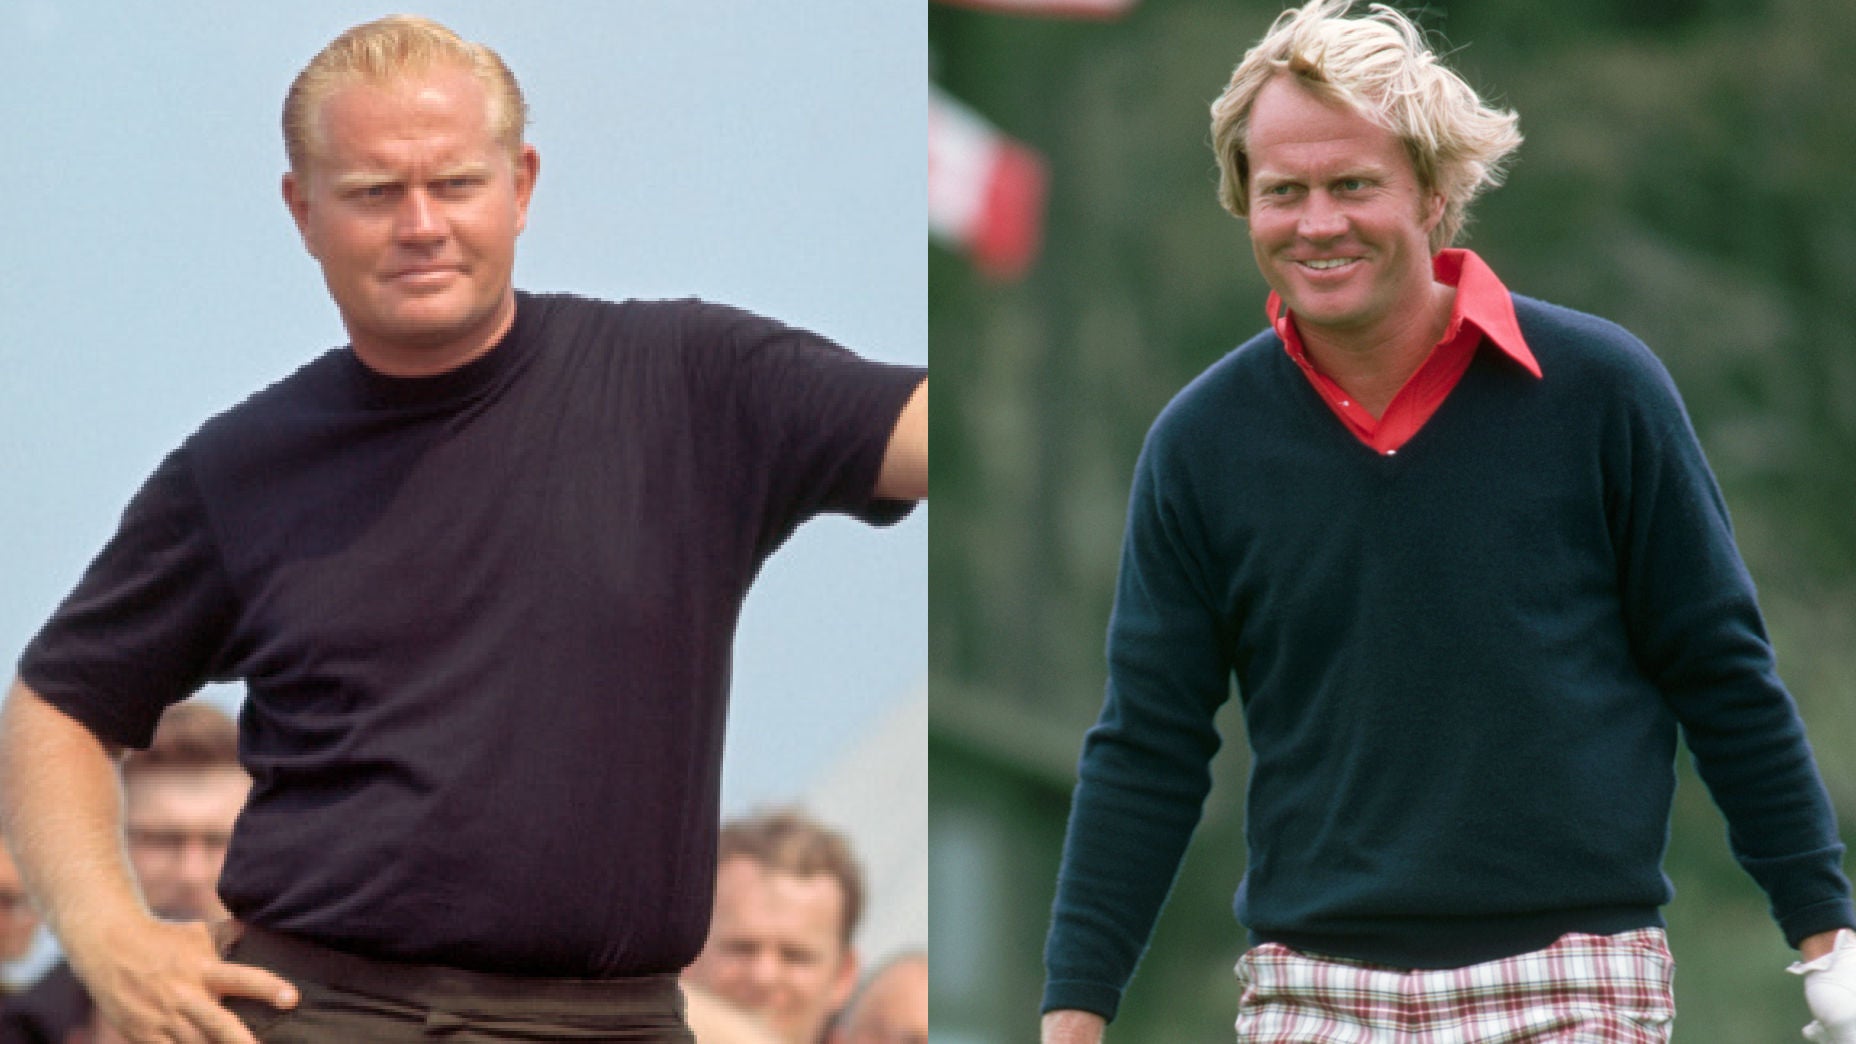 Two images of Jack Nicklaus during pro golf career